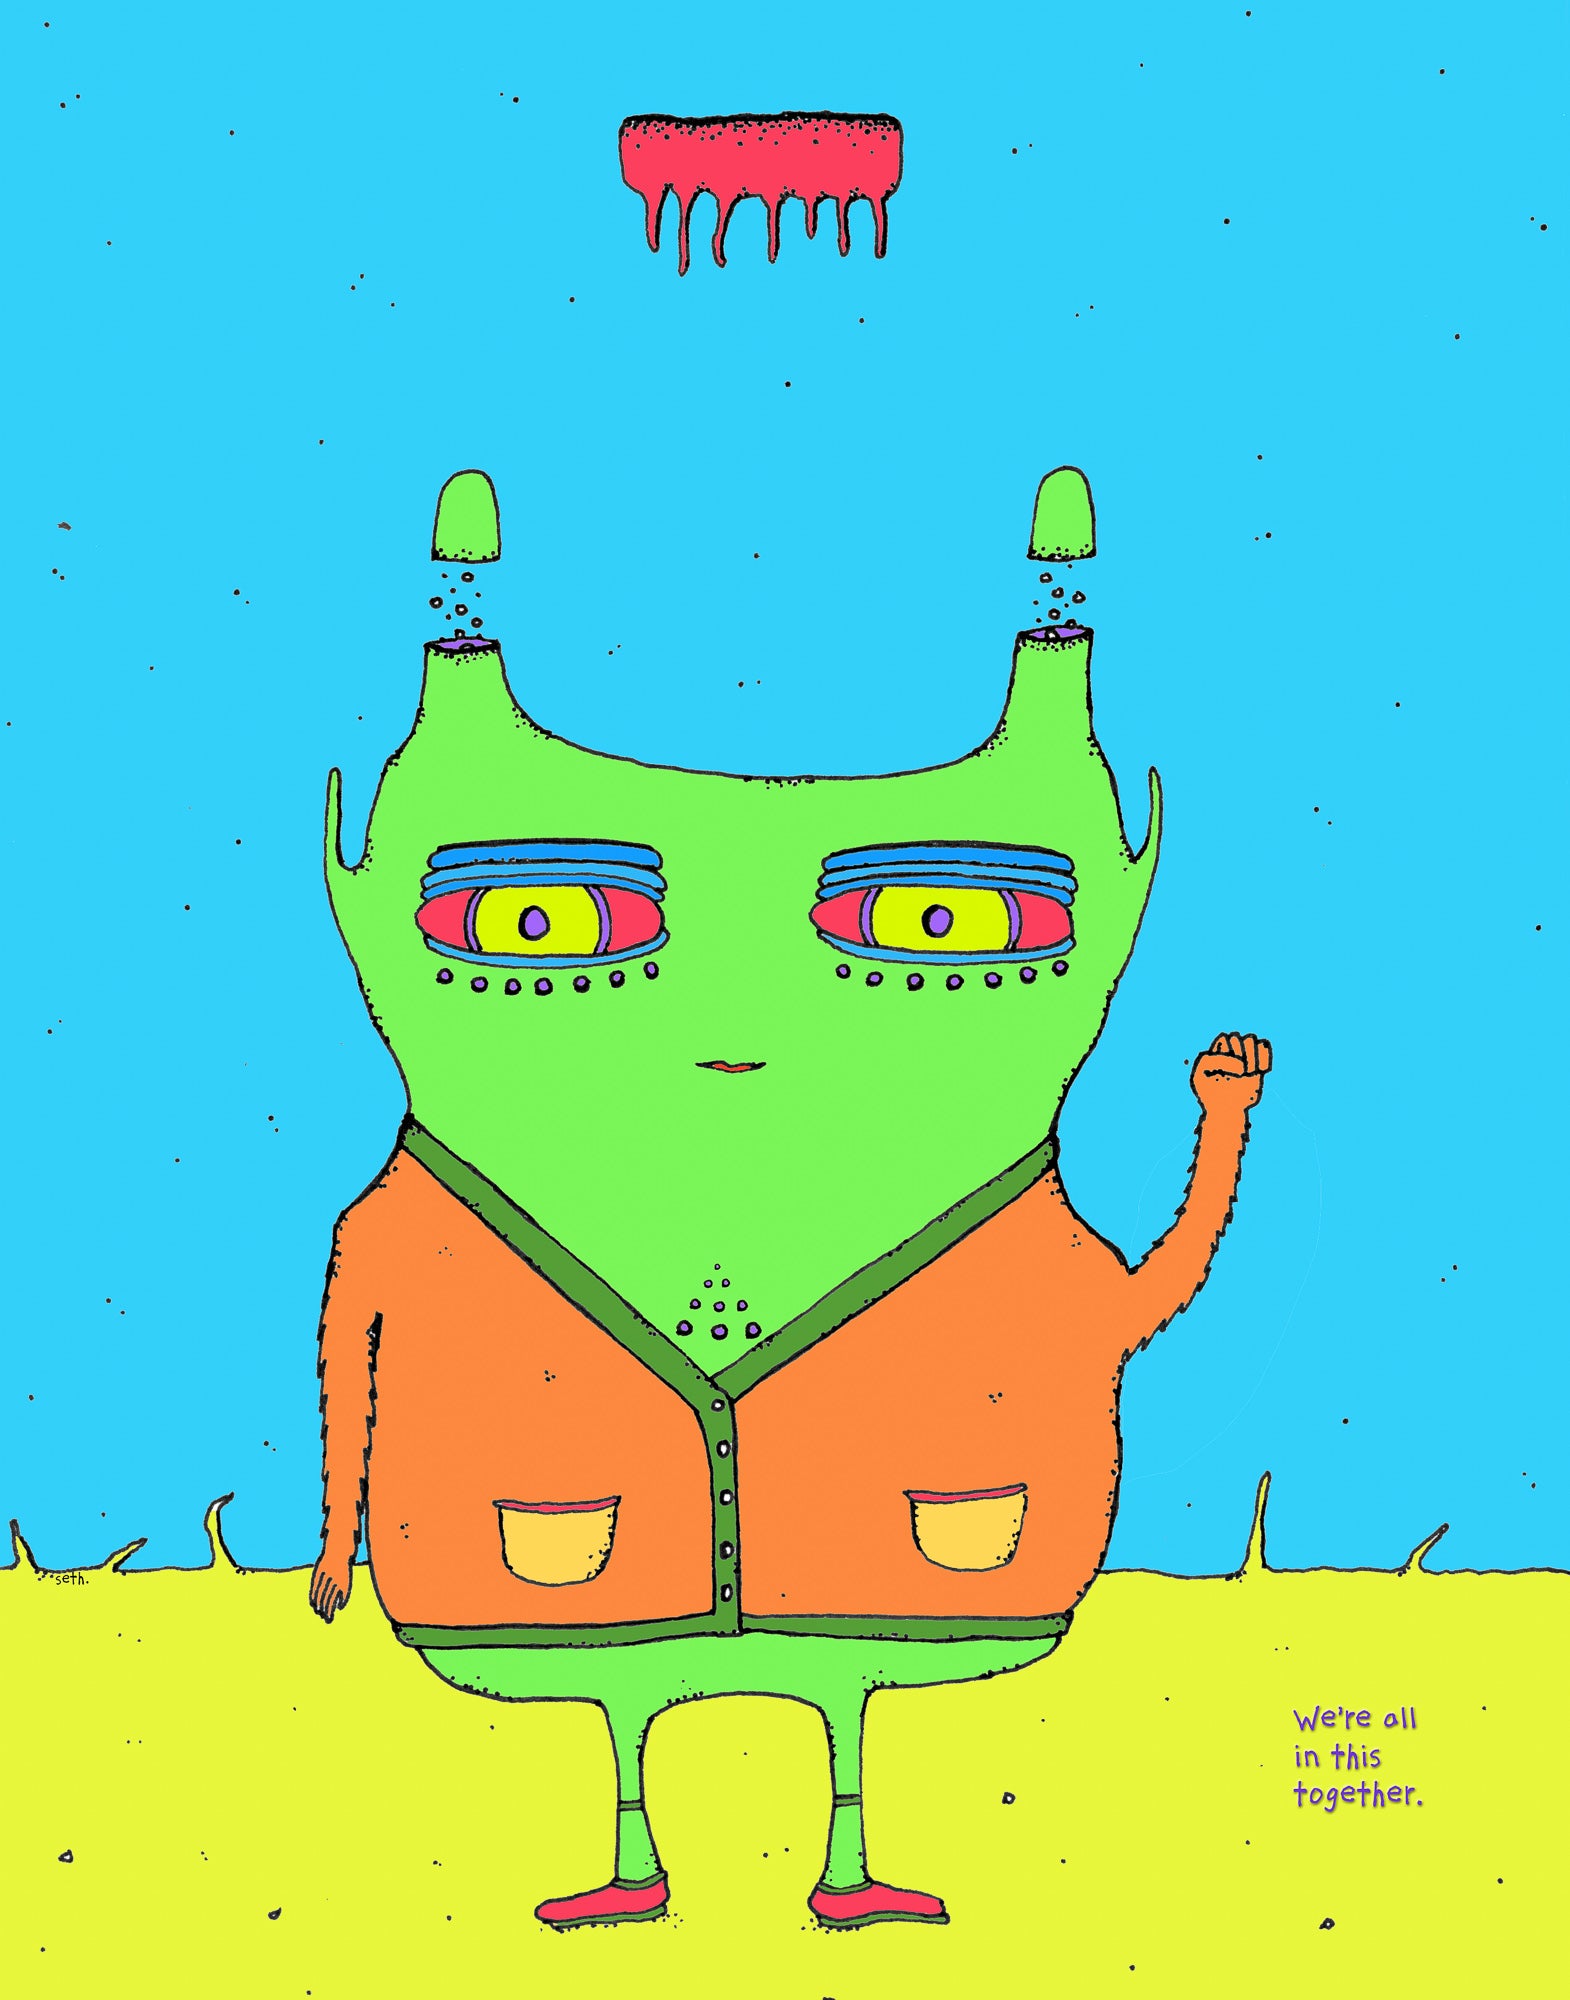 "Hapswins" - This creature stands for you #2 - Fundraising print